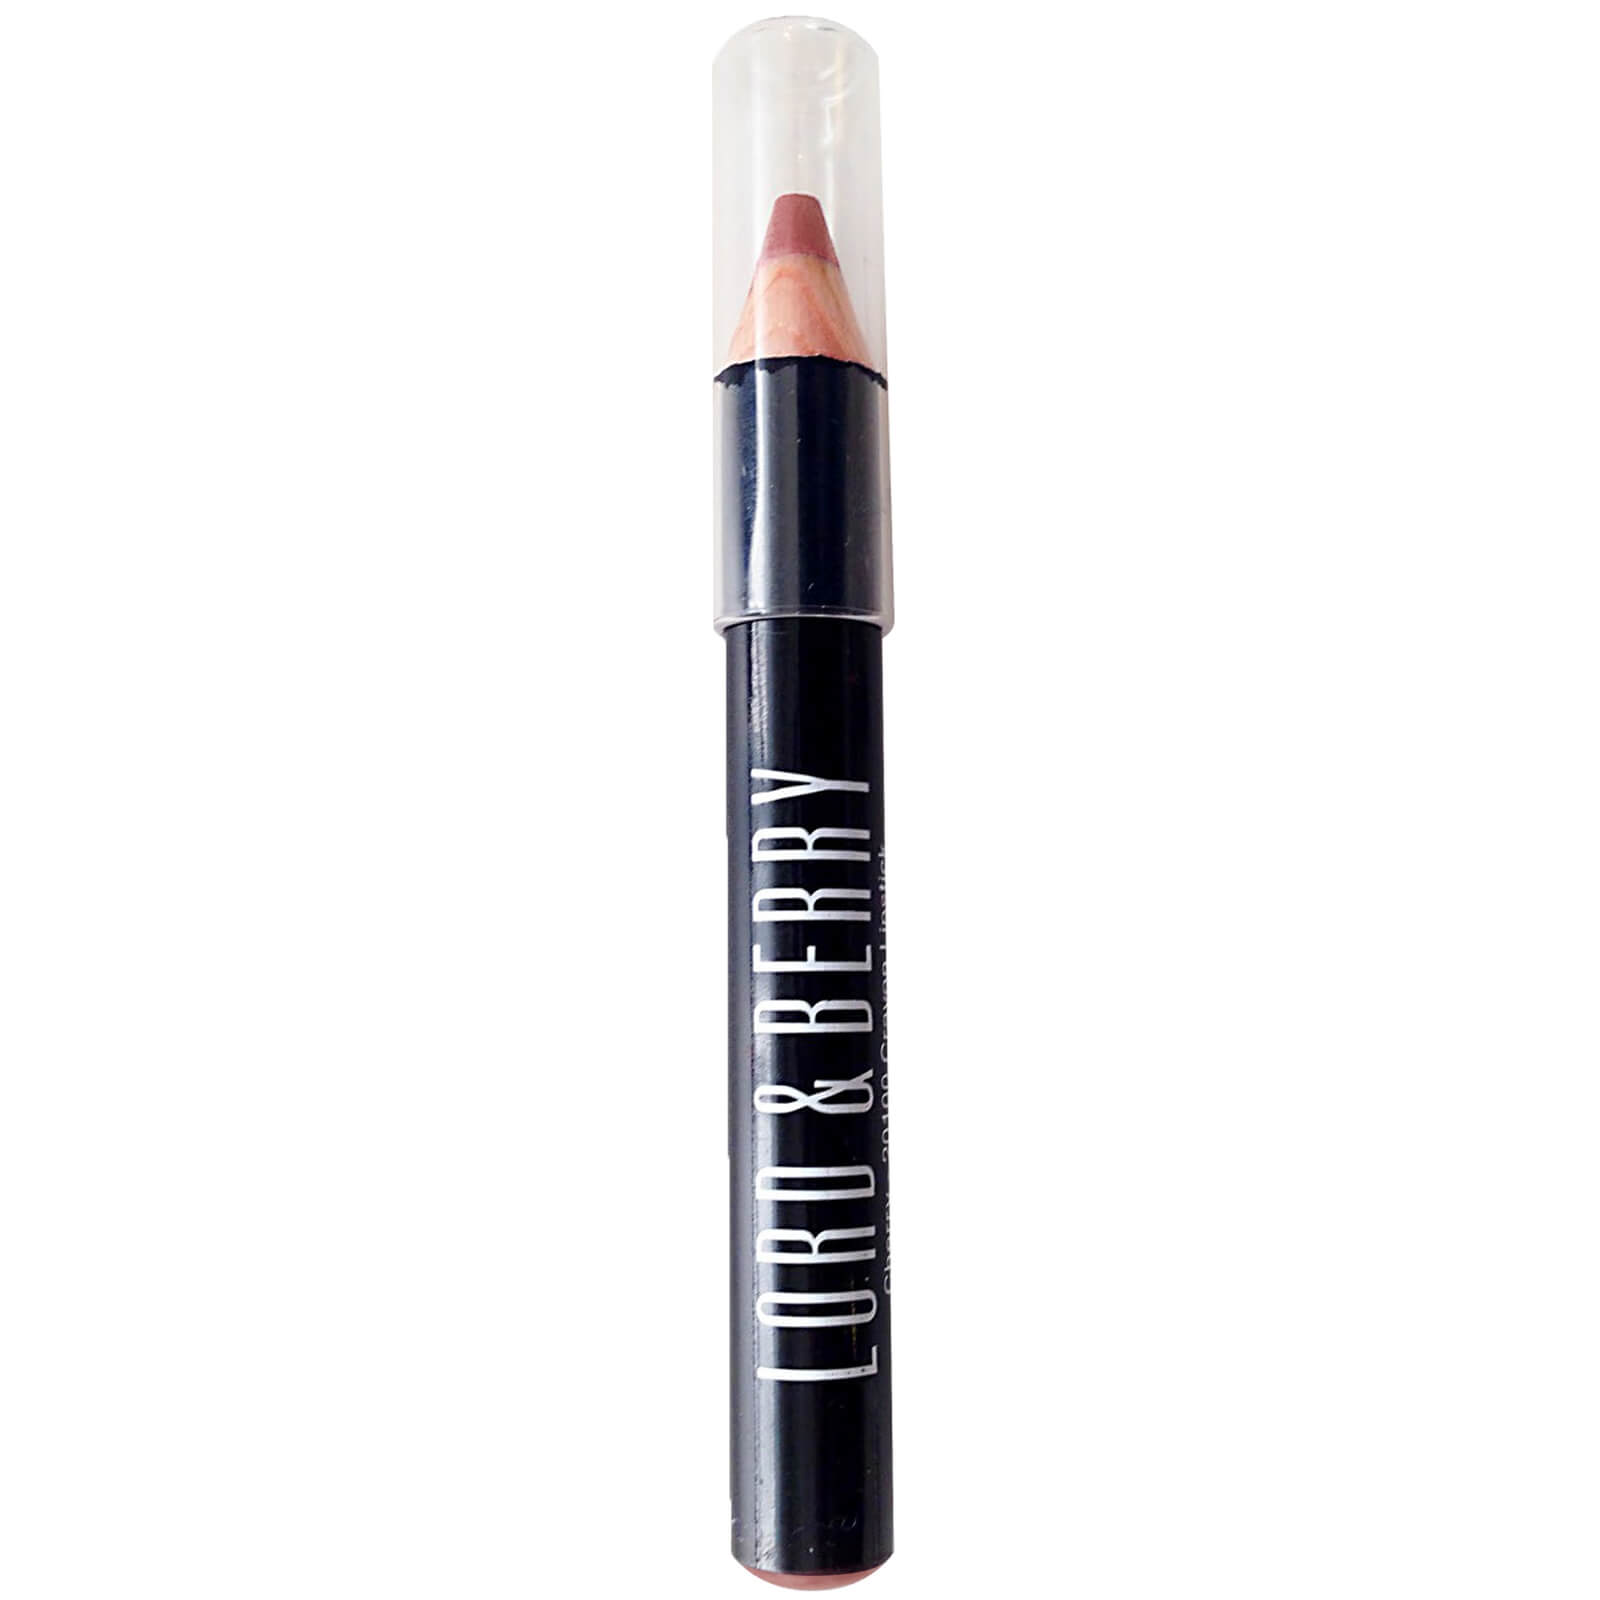 Lord & Berry Maximatte Lipstick Crayon 1.8g (Various Shades) - Undressed